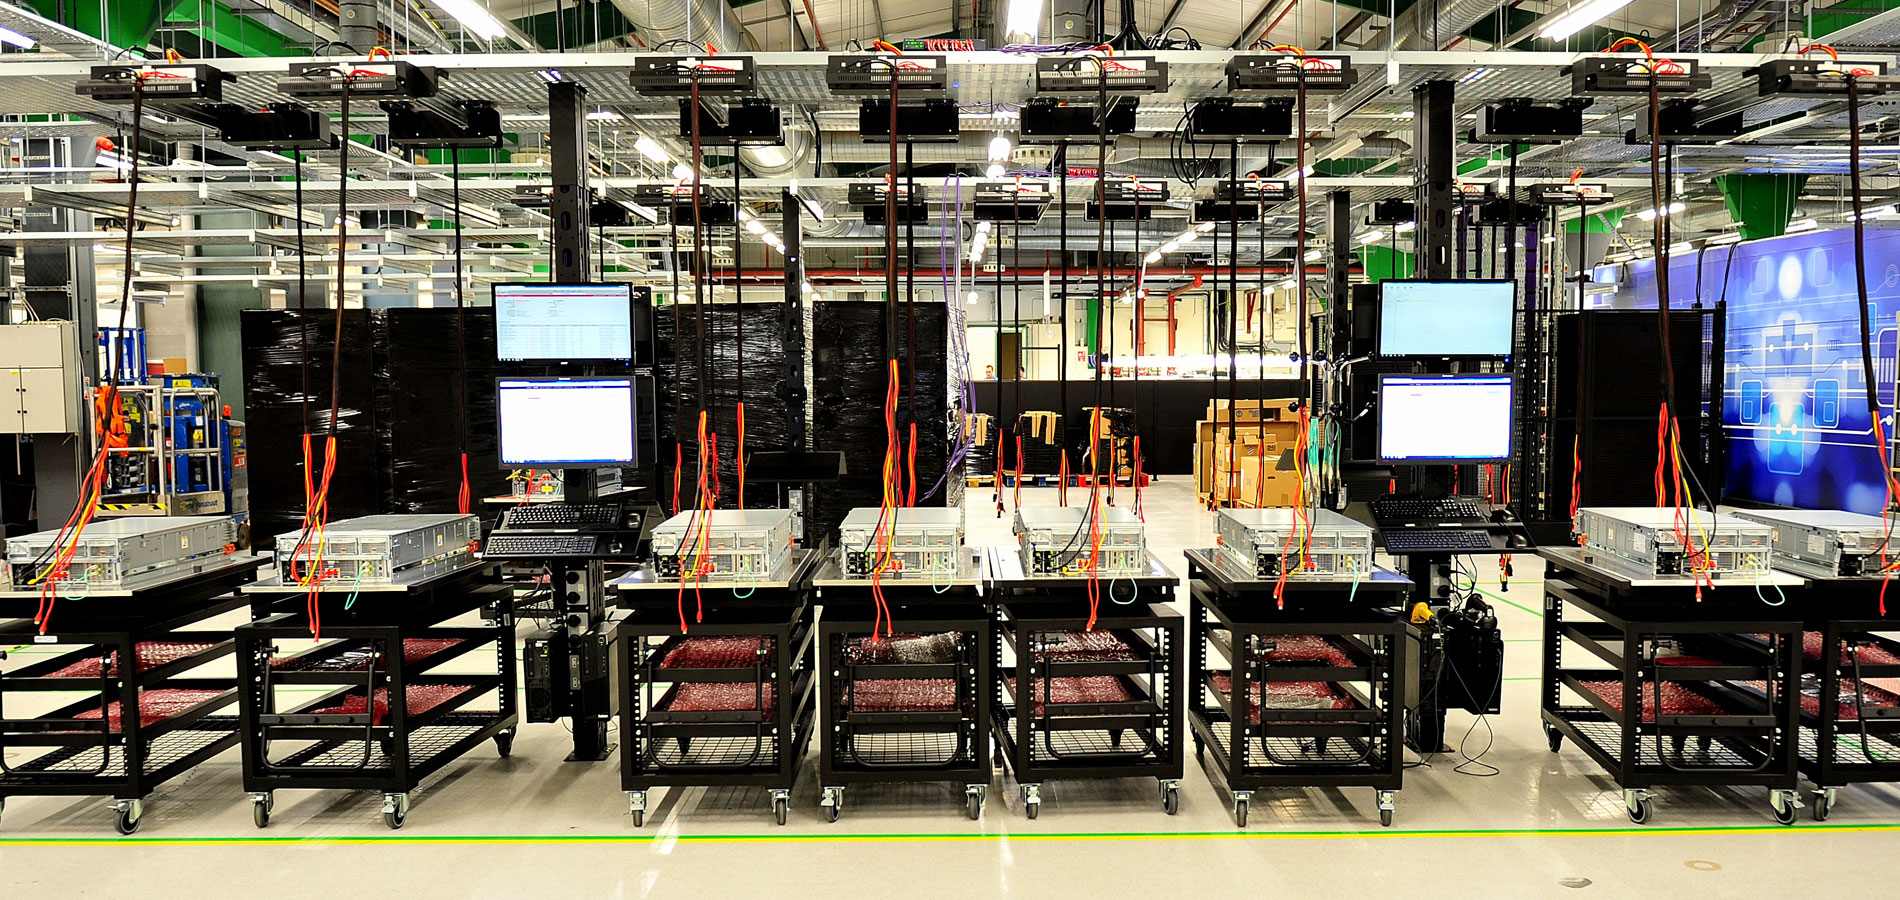 Image showing a full fit-out of an ICT server test floor